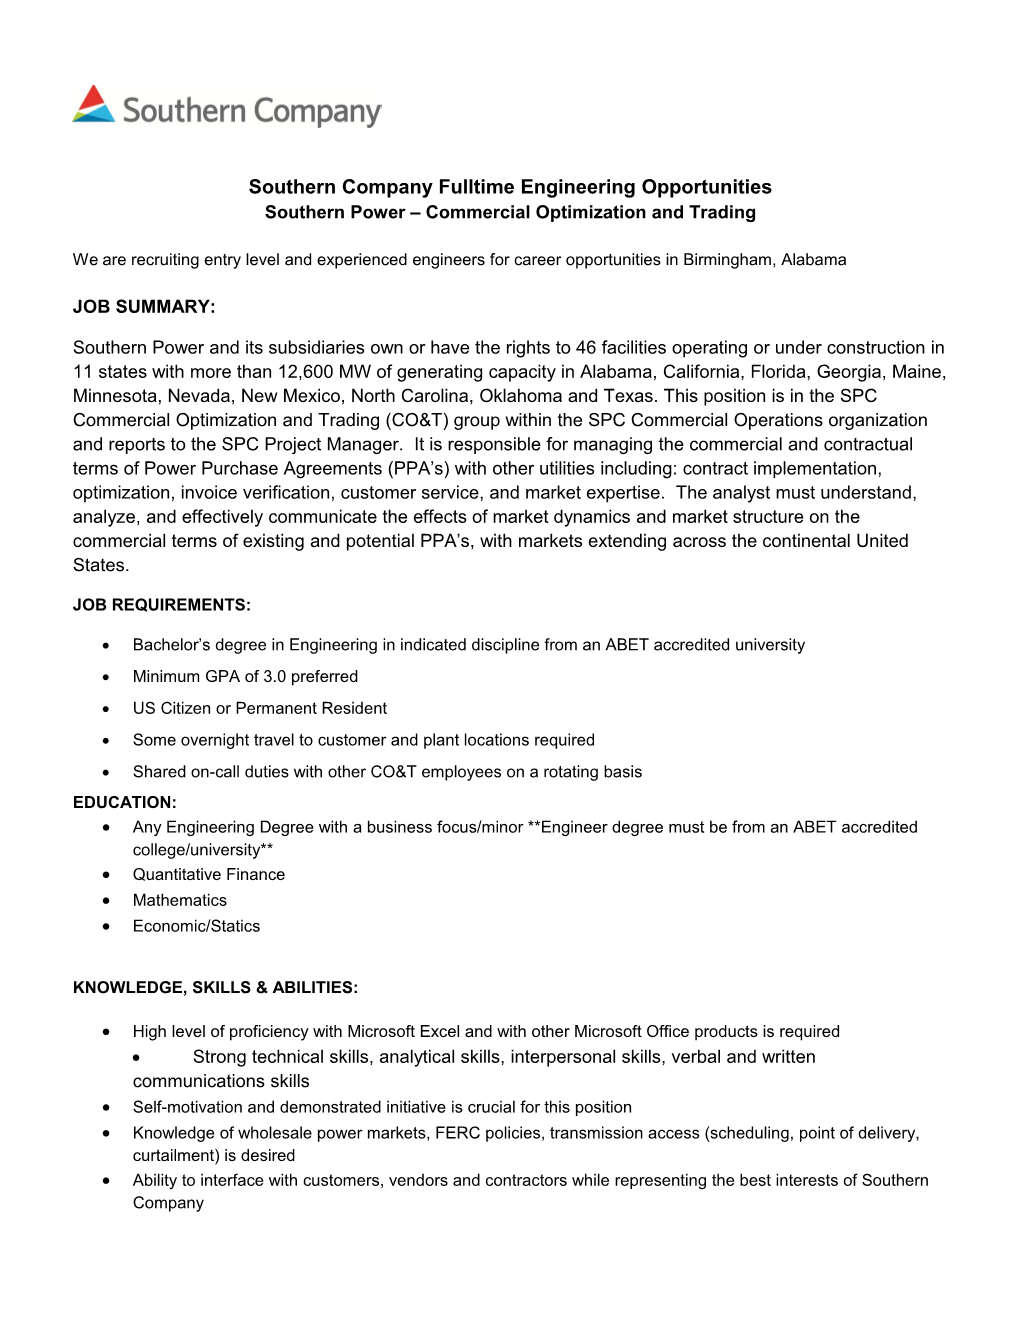 Southern Company Fulltime Engineering Opportunities